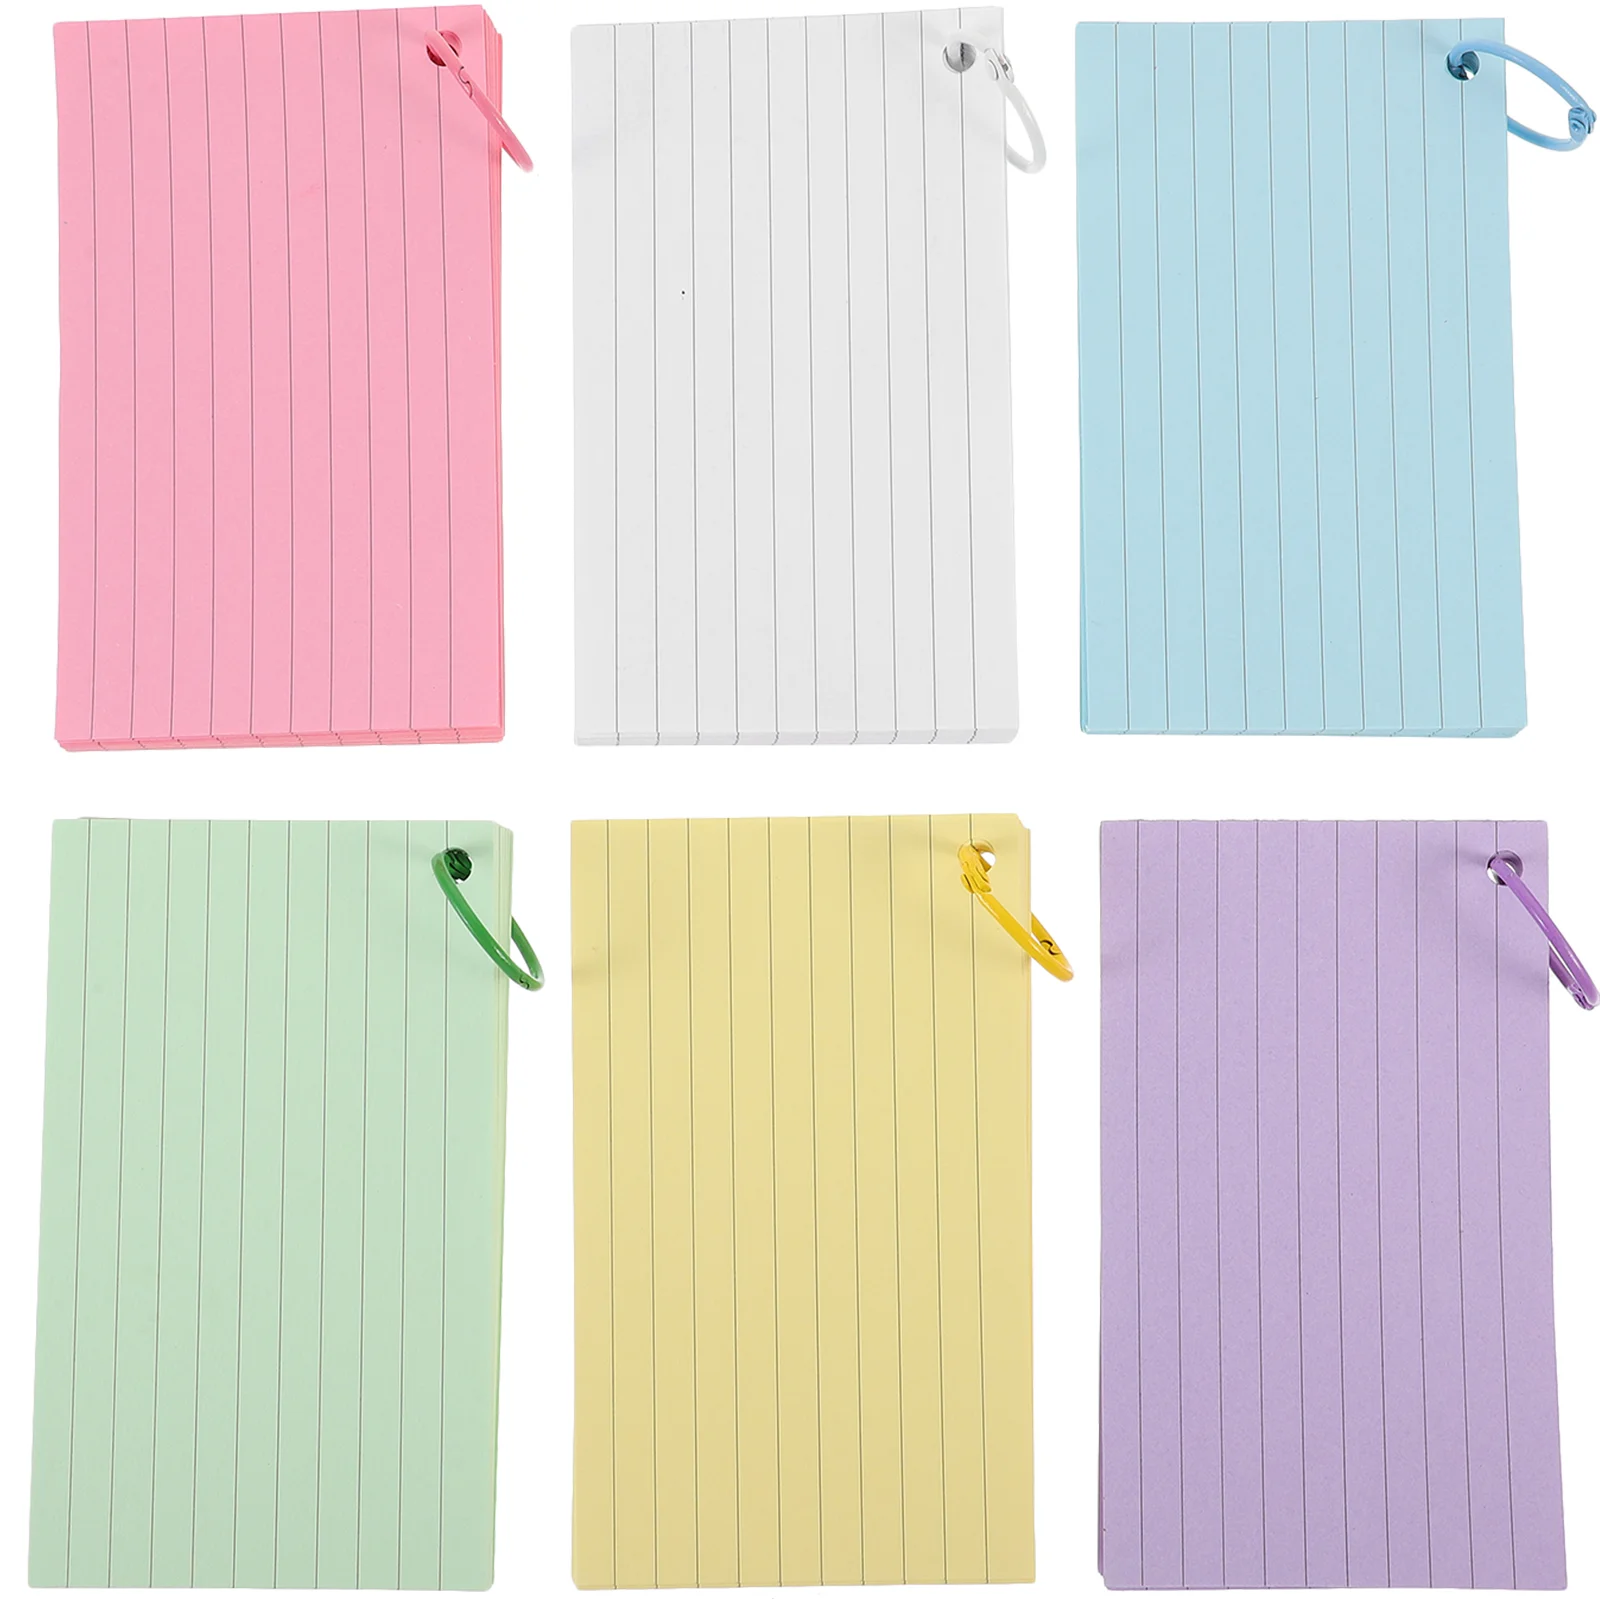 

Index Cards With Holes Punched Flash Cards With Rings Studying Note Cards Writing Index Card Cards Lined Note Lattice